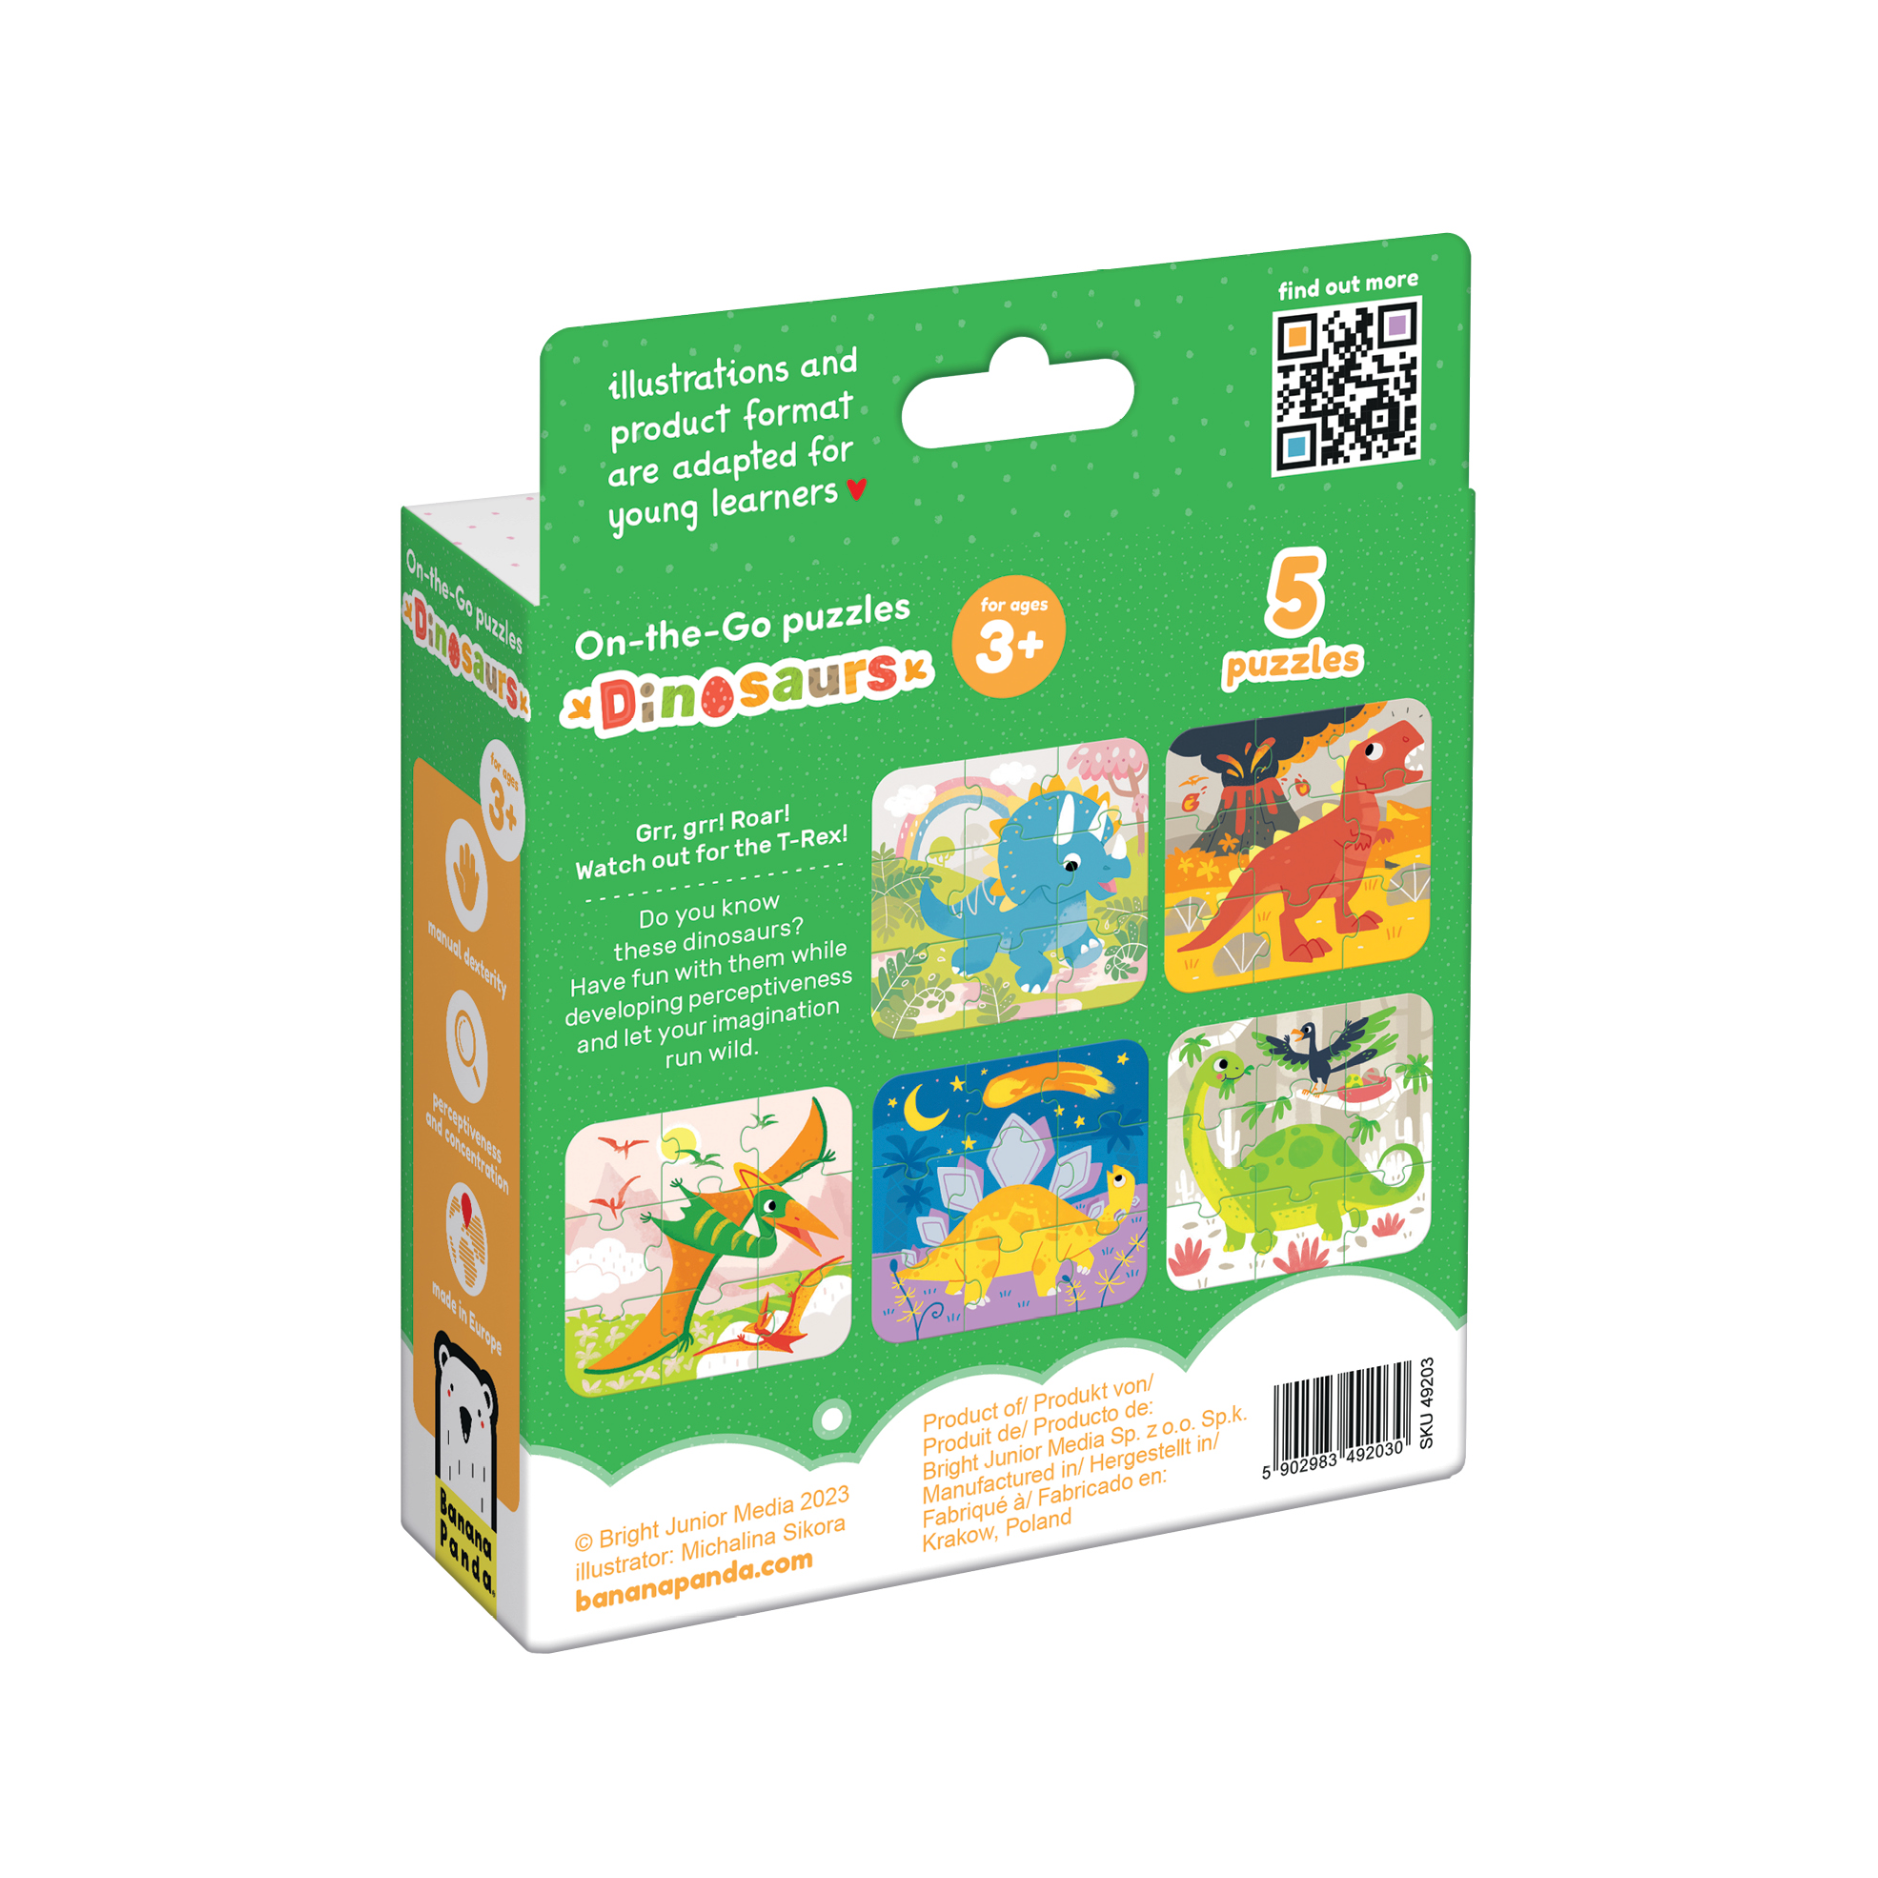 On the Go Puzzles - Dinosaurs